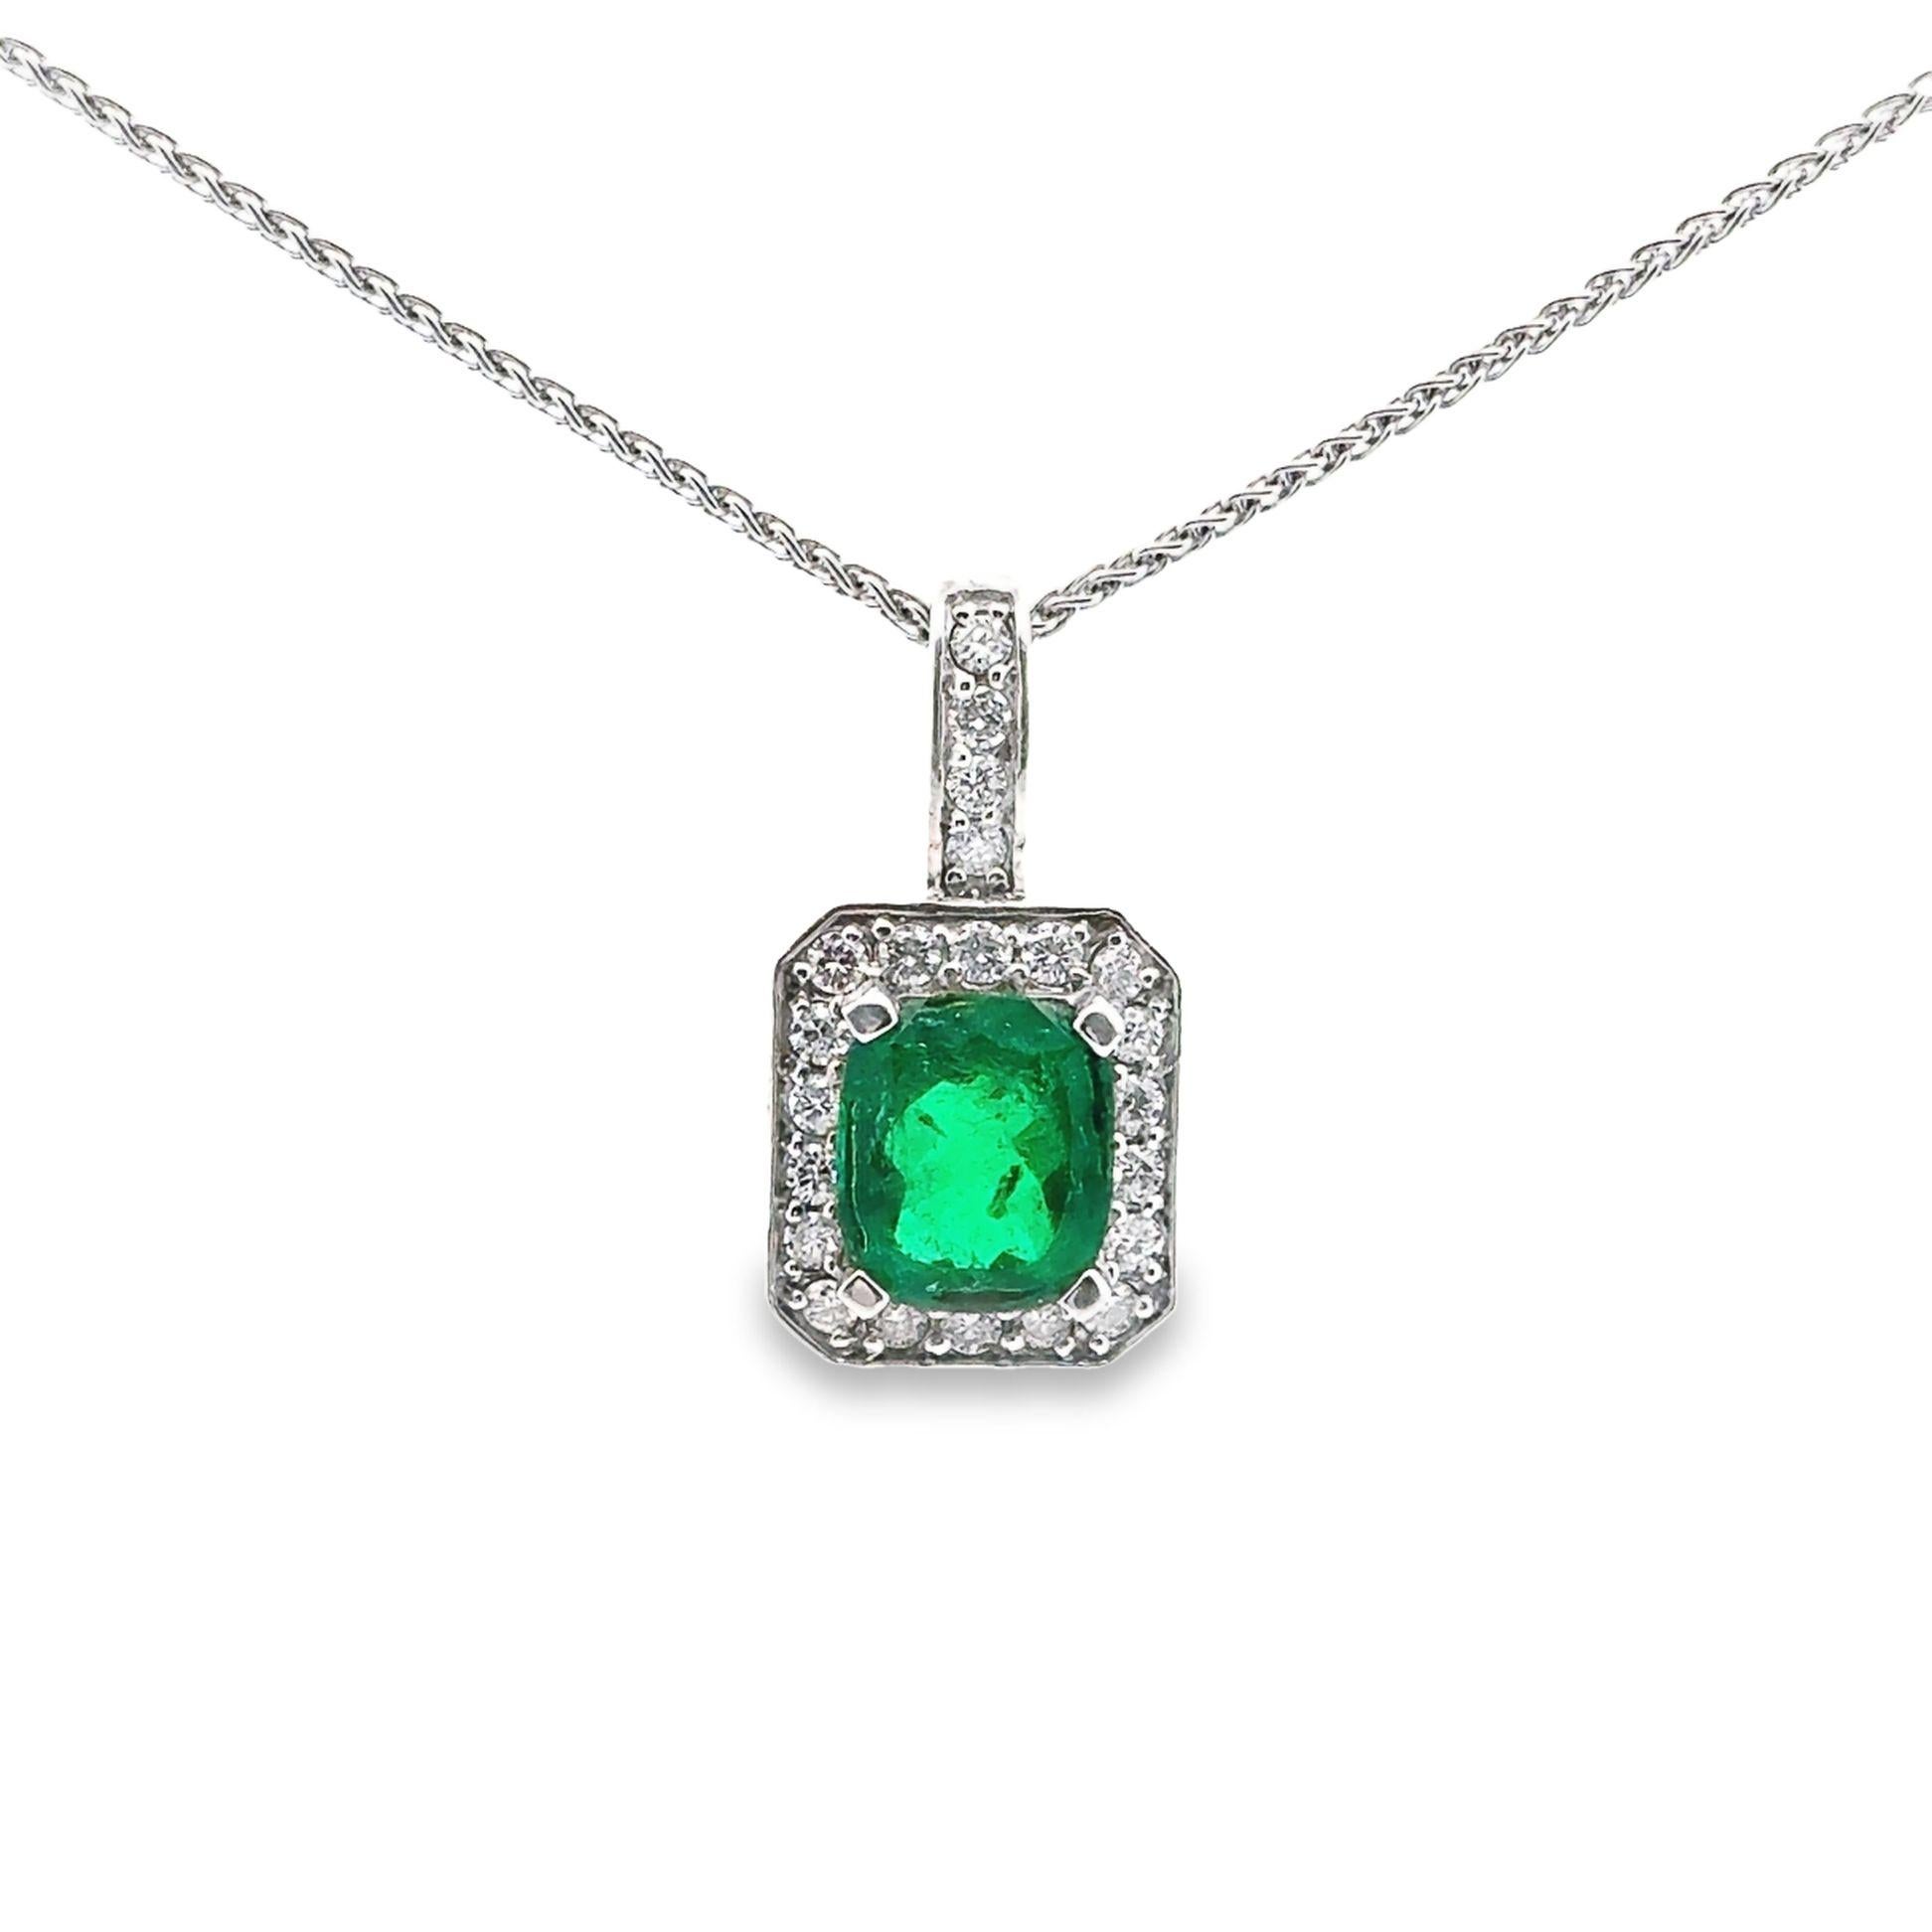 4.83 Carat Emerald 18k White Gold Pendant Necklace In Excellent Condition For Sale In Beverly Hills, CA